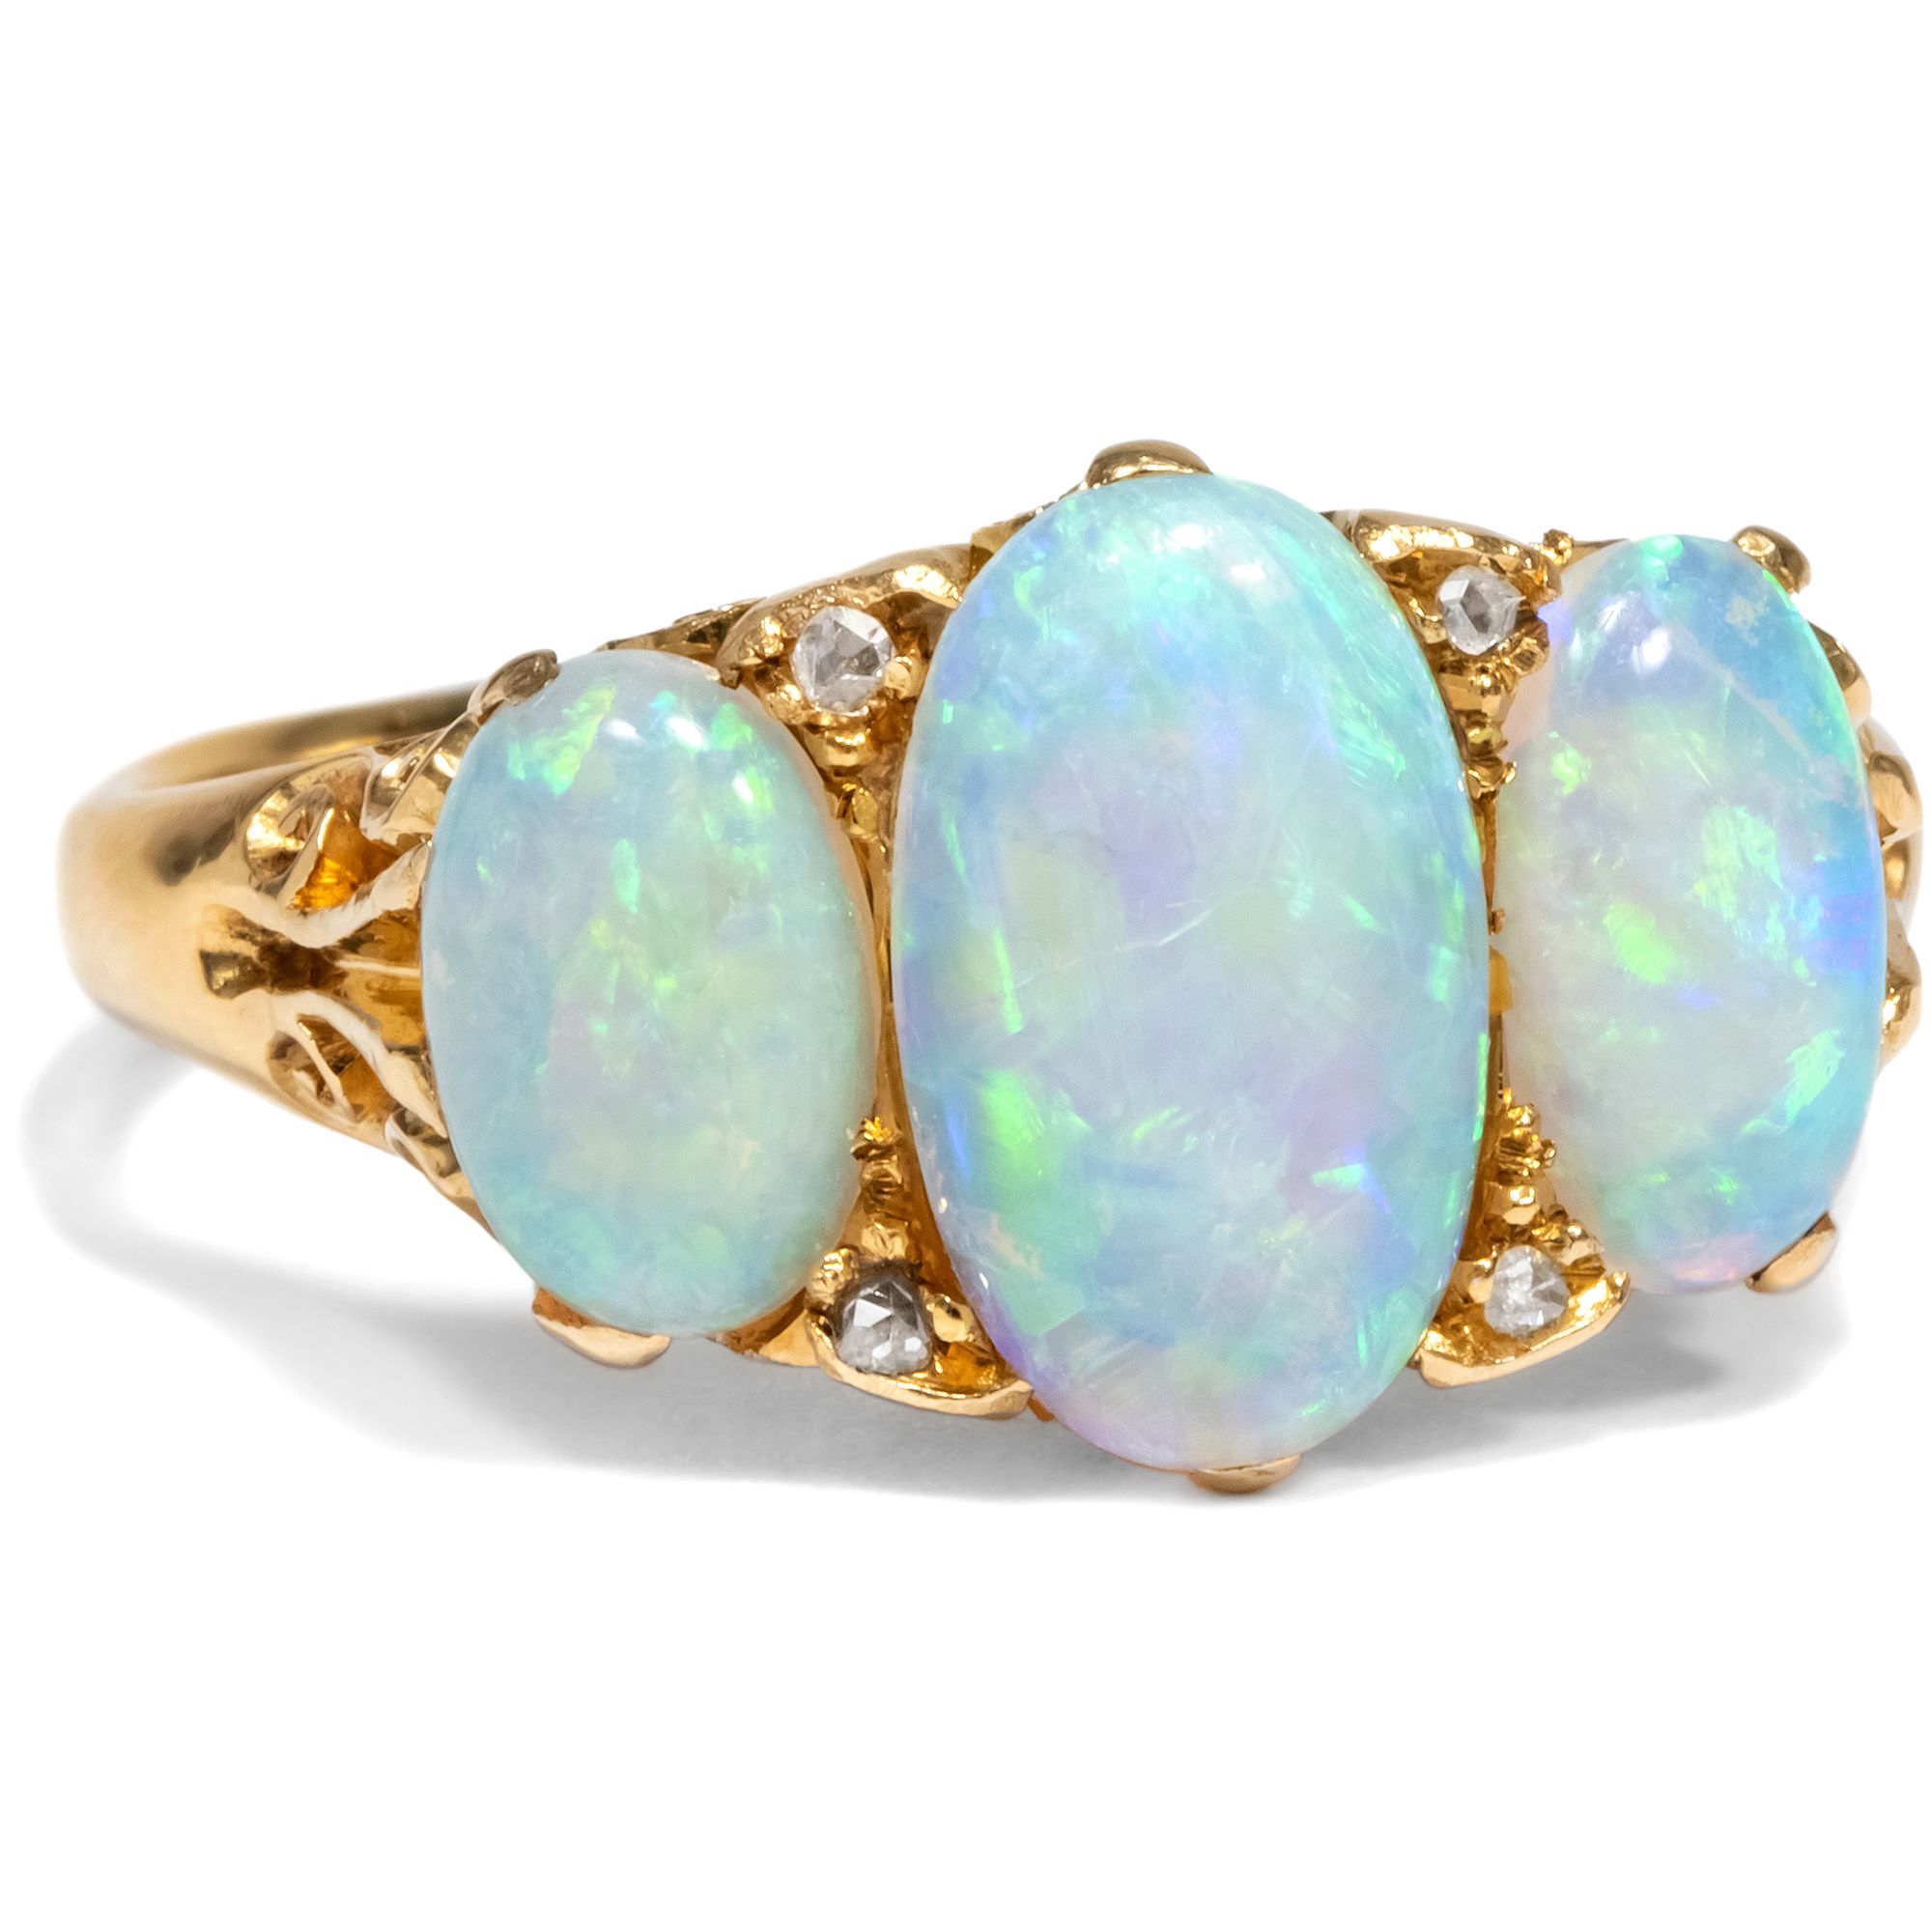 Precious Ring with Australian Opals & Diamonds in Gold, England c. 1900